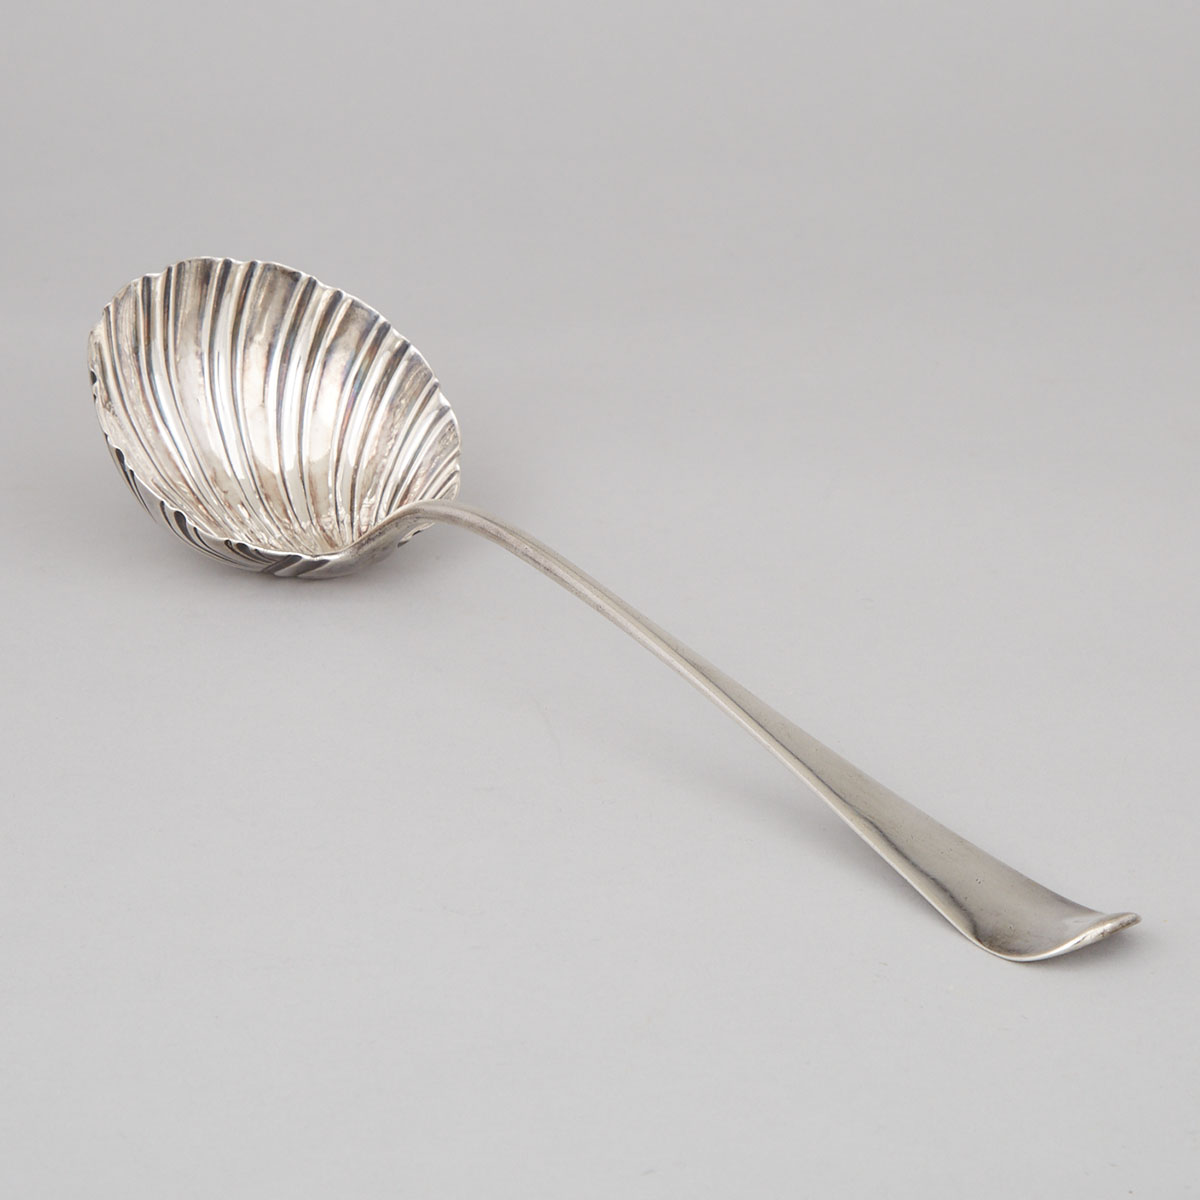 George III Silver Hanoverian Pattern Soup Ladle, Thomas & William Chawner, London, 1762